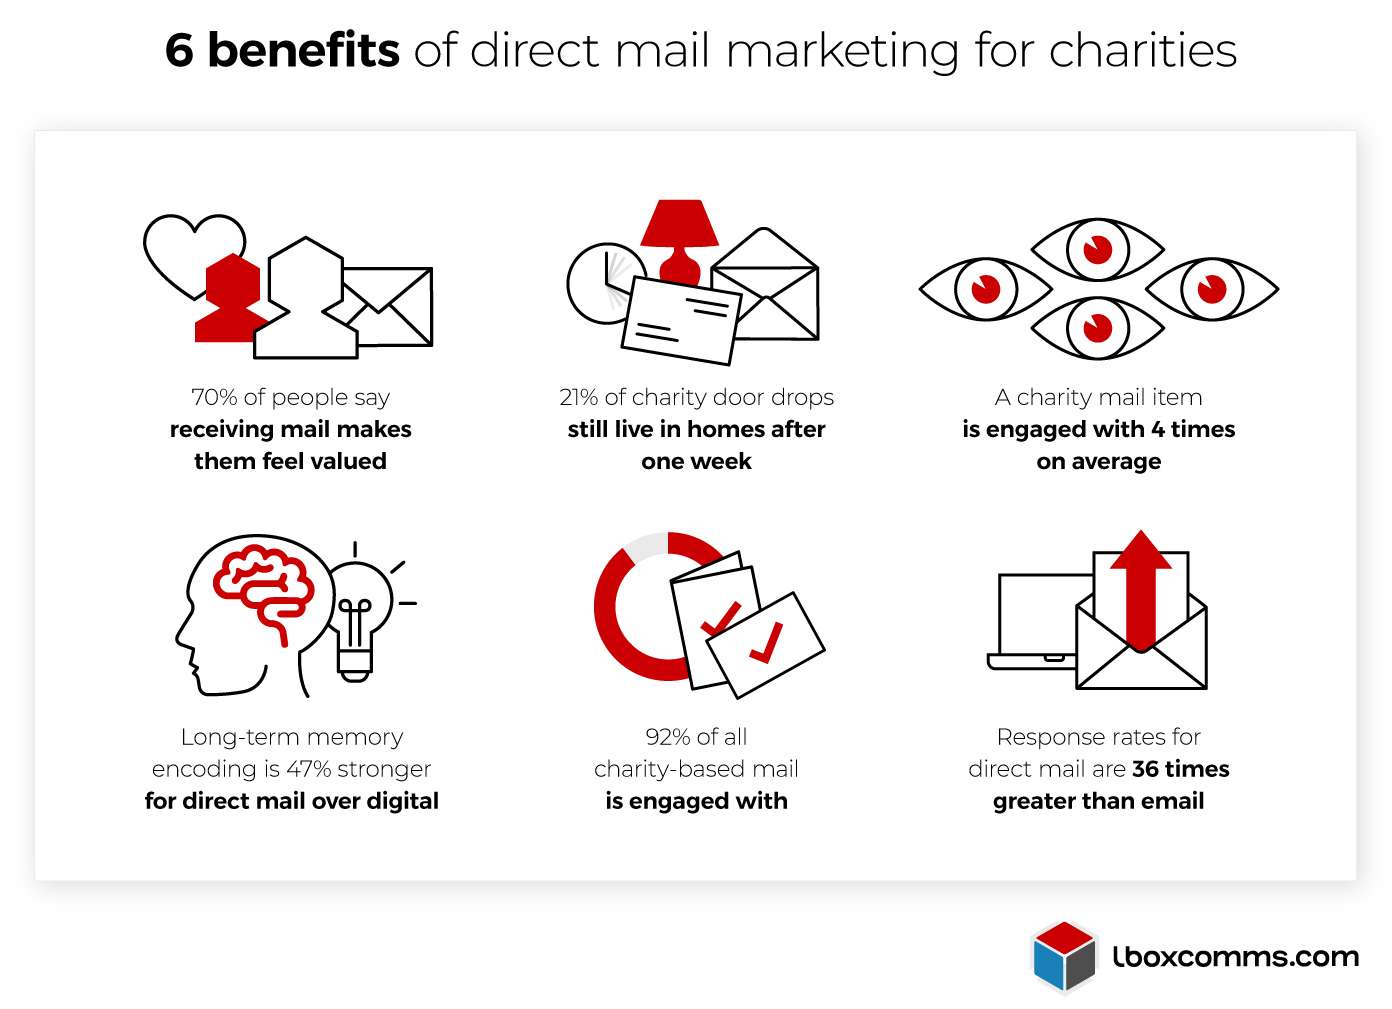 6 benefits of charity direct mail marketing campaigns - Engagement Infographic